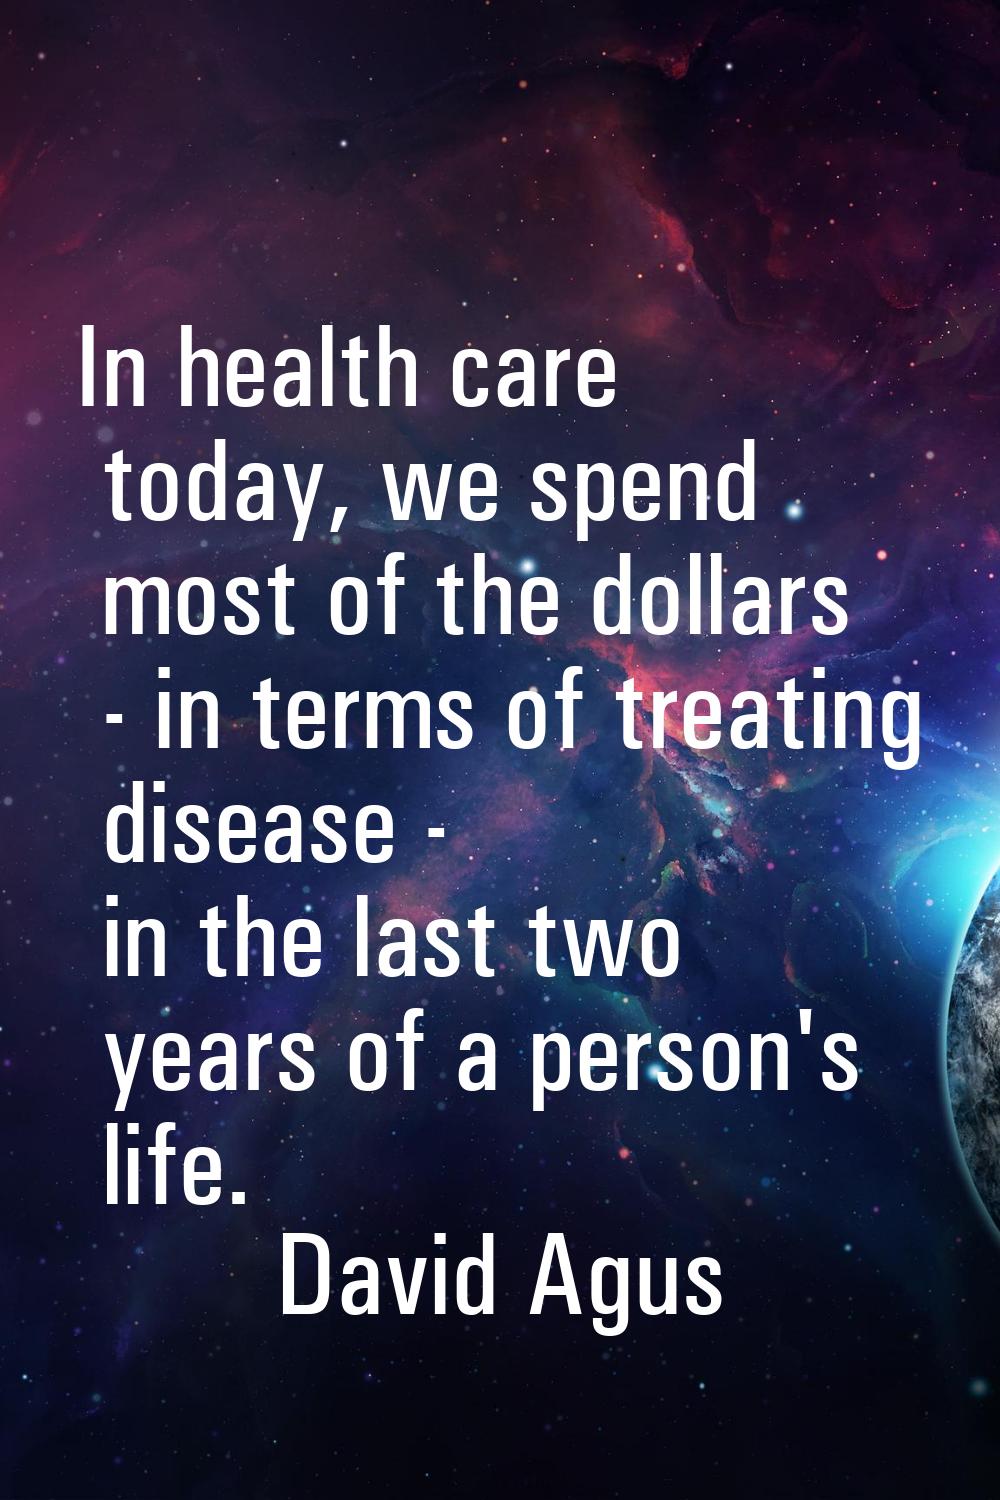 In health care today, we spend most of the dollars - in terms of treating disease - in the last two